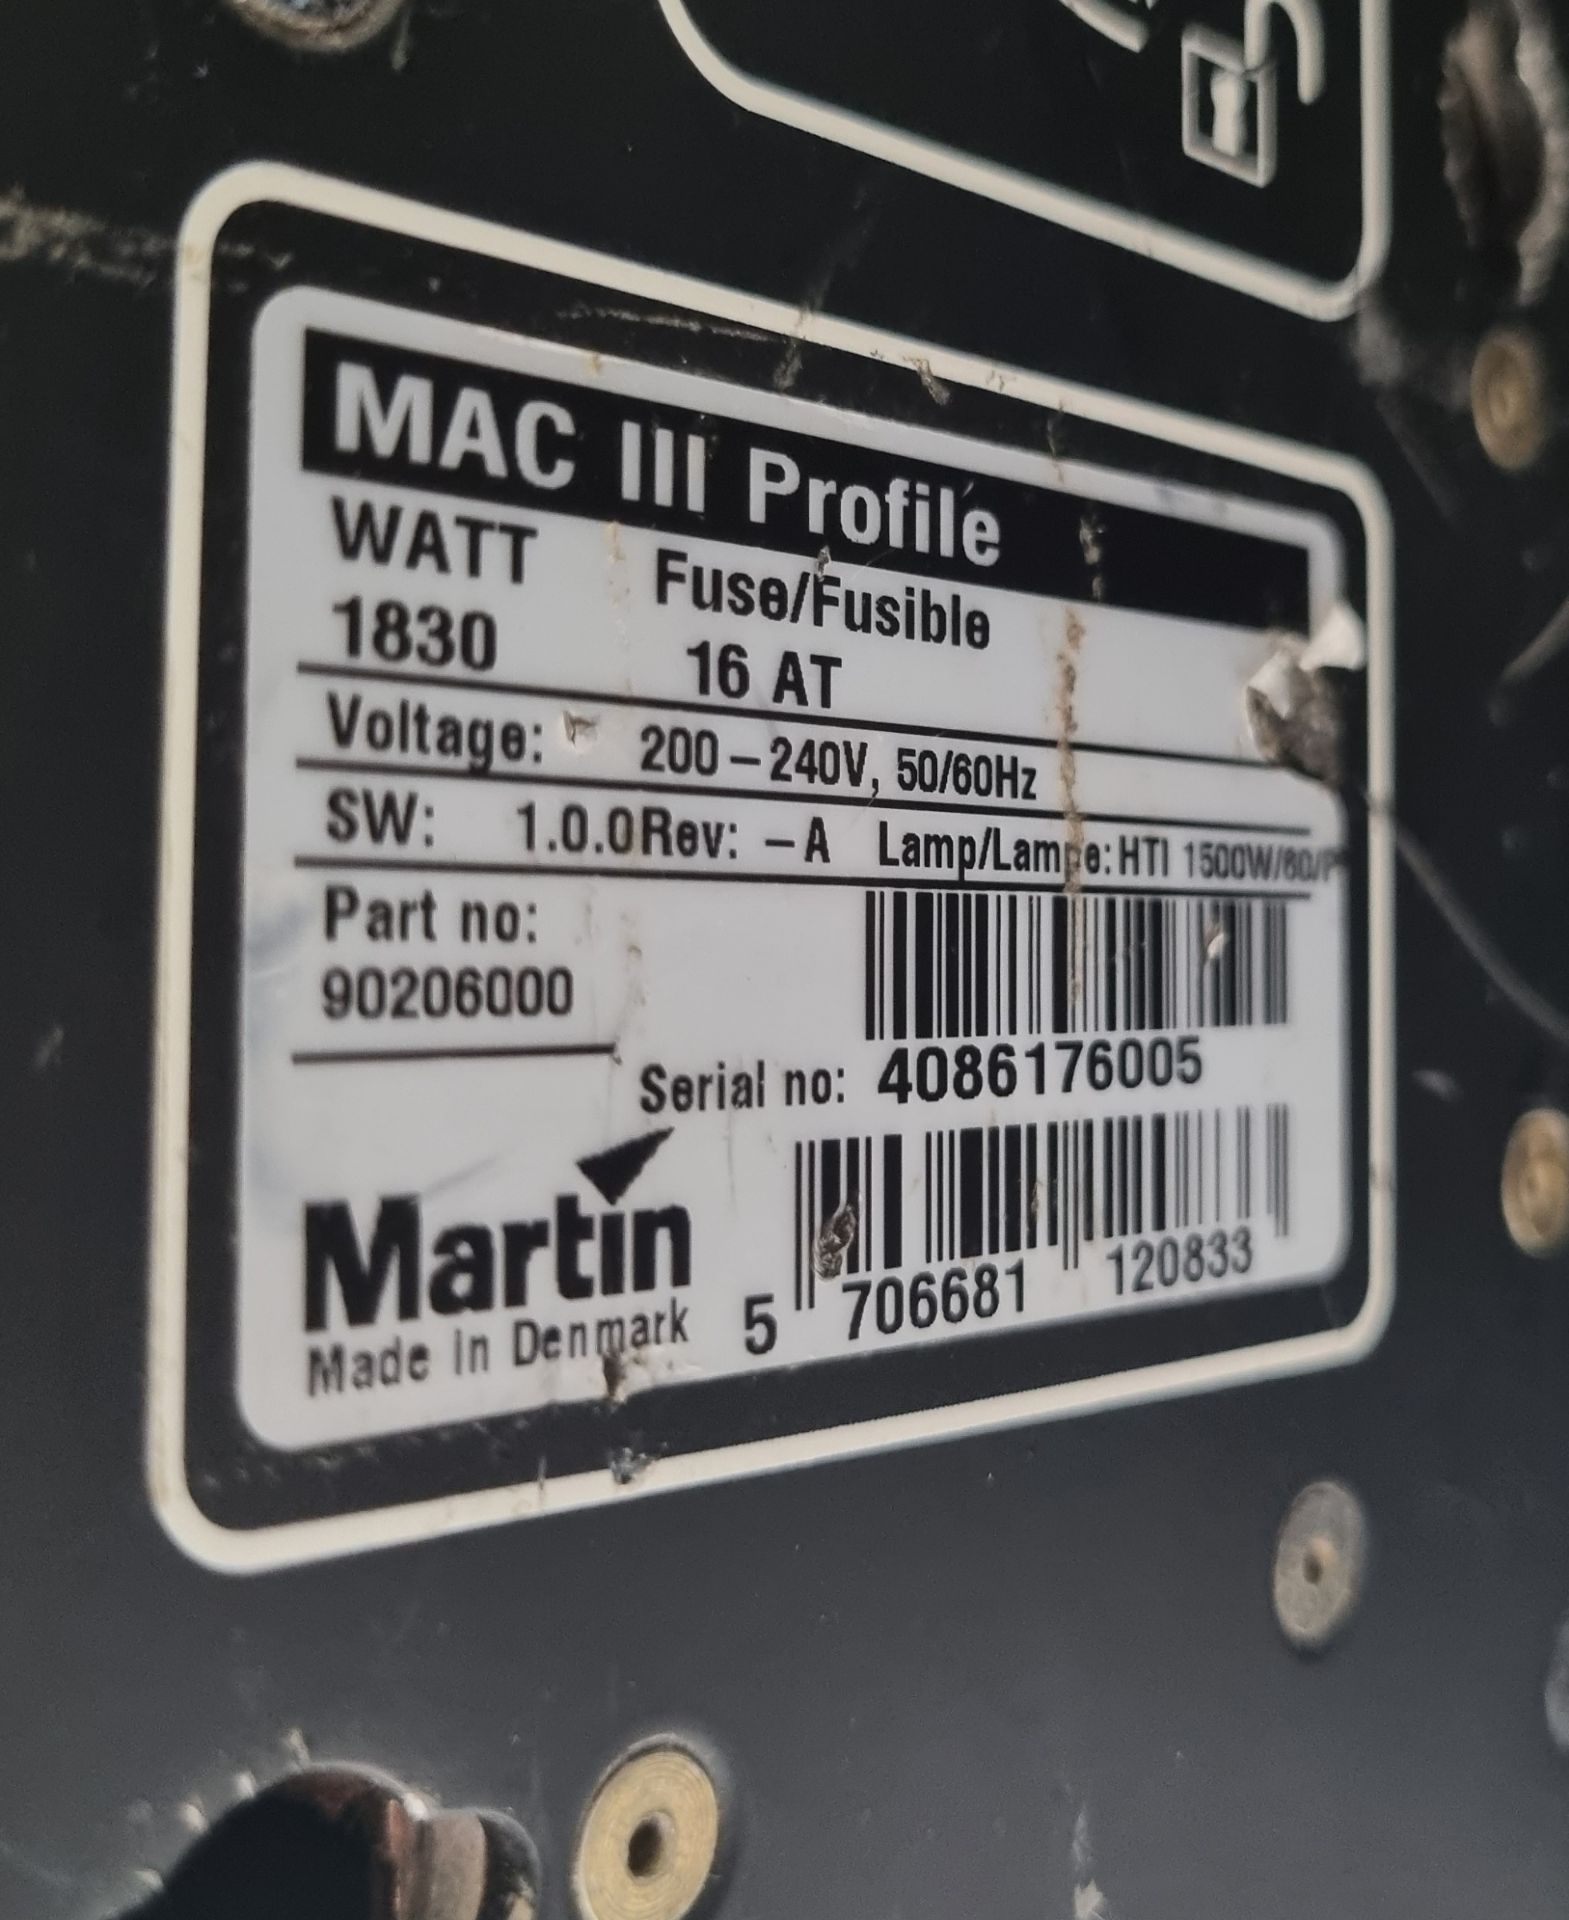 Martin Mac III Profile 1800W high output moving light with flight case on wheels - L 800 x W 600 x H - Image 8 of 8